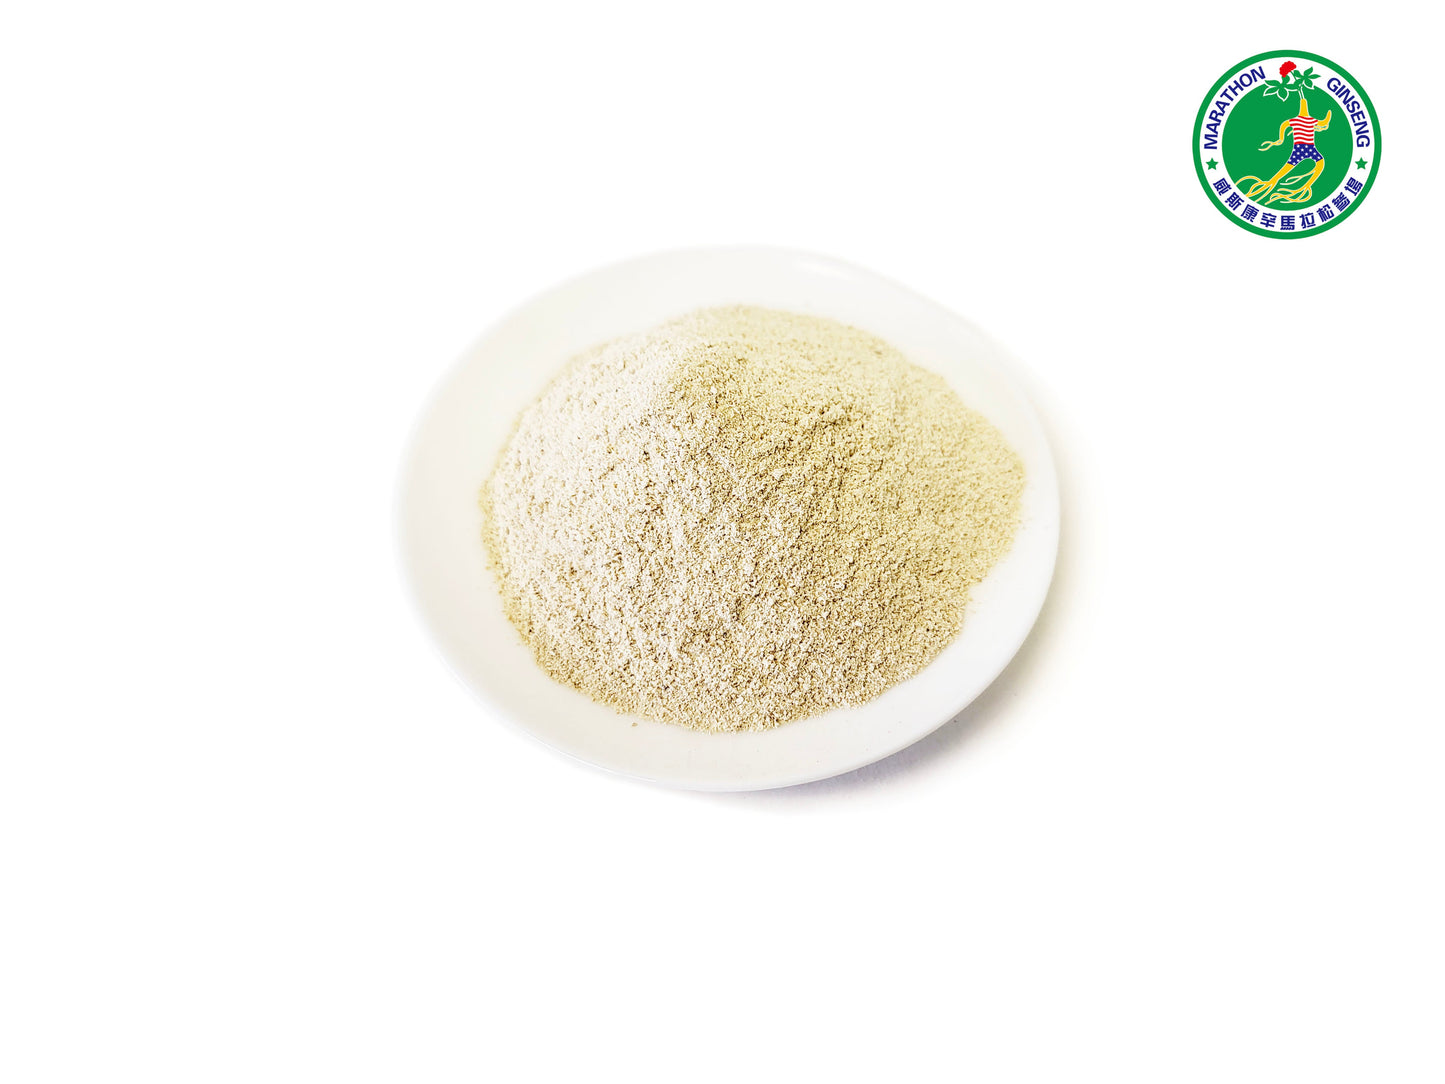 618CN - 3/5 Year Ginseng Powder - 0.5lb - Delivery in China